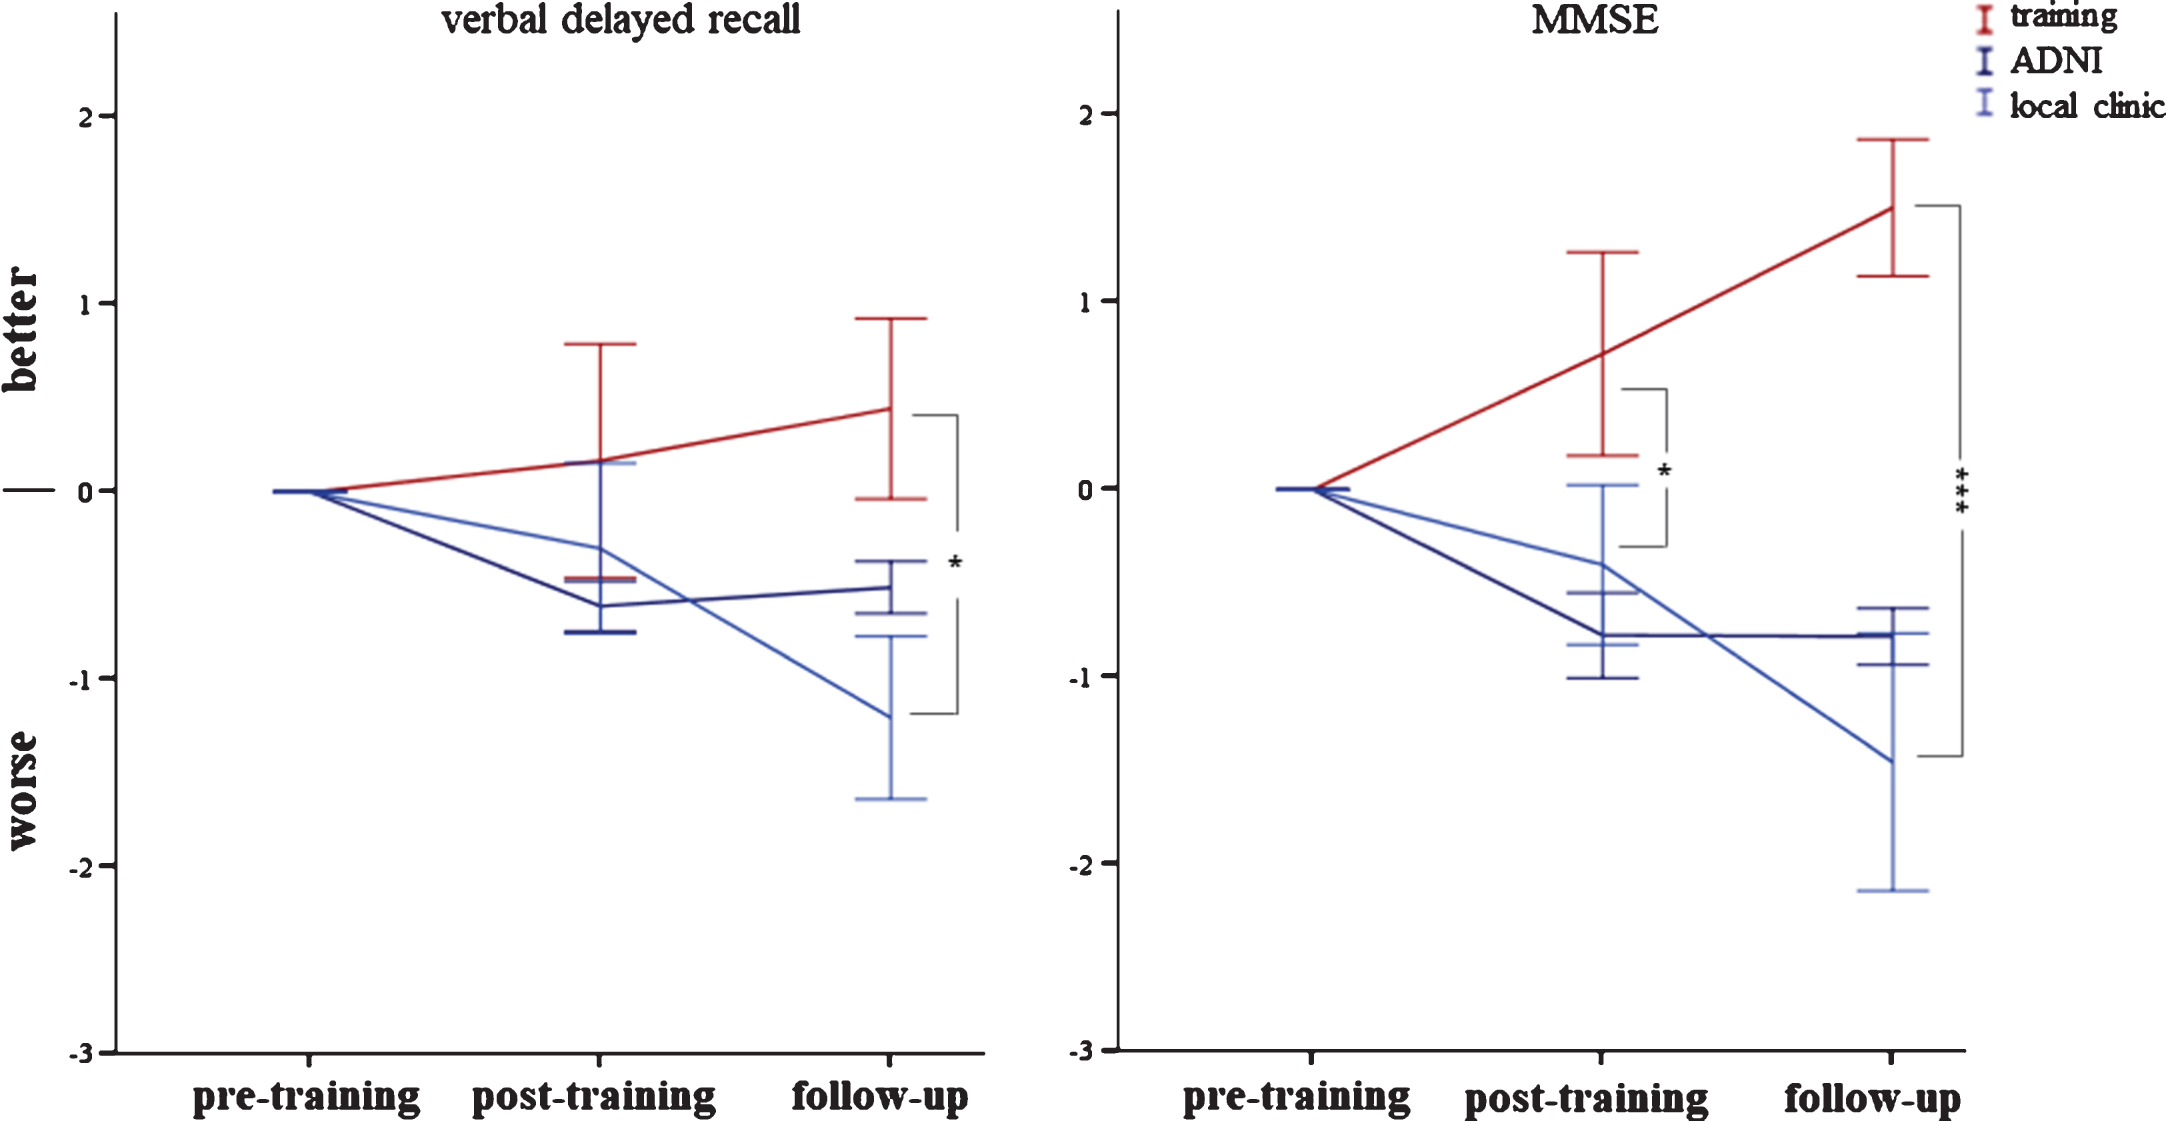 Change in verbal delayed recall and Mini-Mental Status Examination (MMSE) between pre- to post-training and 6 months later. The cognitive intervention group is shown in red, the ADNI and local memory clinic are depicted in blue (the latter two did not receive a cognitive training). Significant at *p < 0.05 or ***p < 0.001, respectively. Error bars indicate±1 standard error of the mean. Note: Data from the ADNI was not included in the statistical analysis.